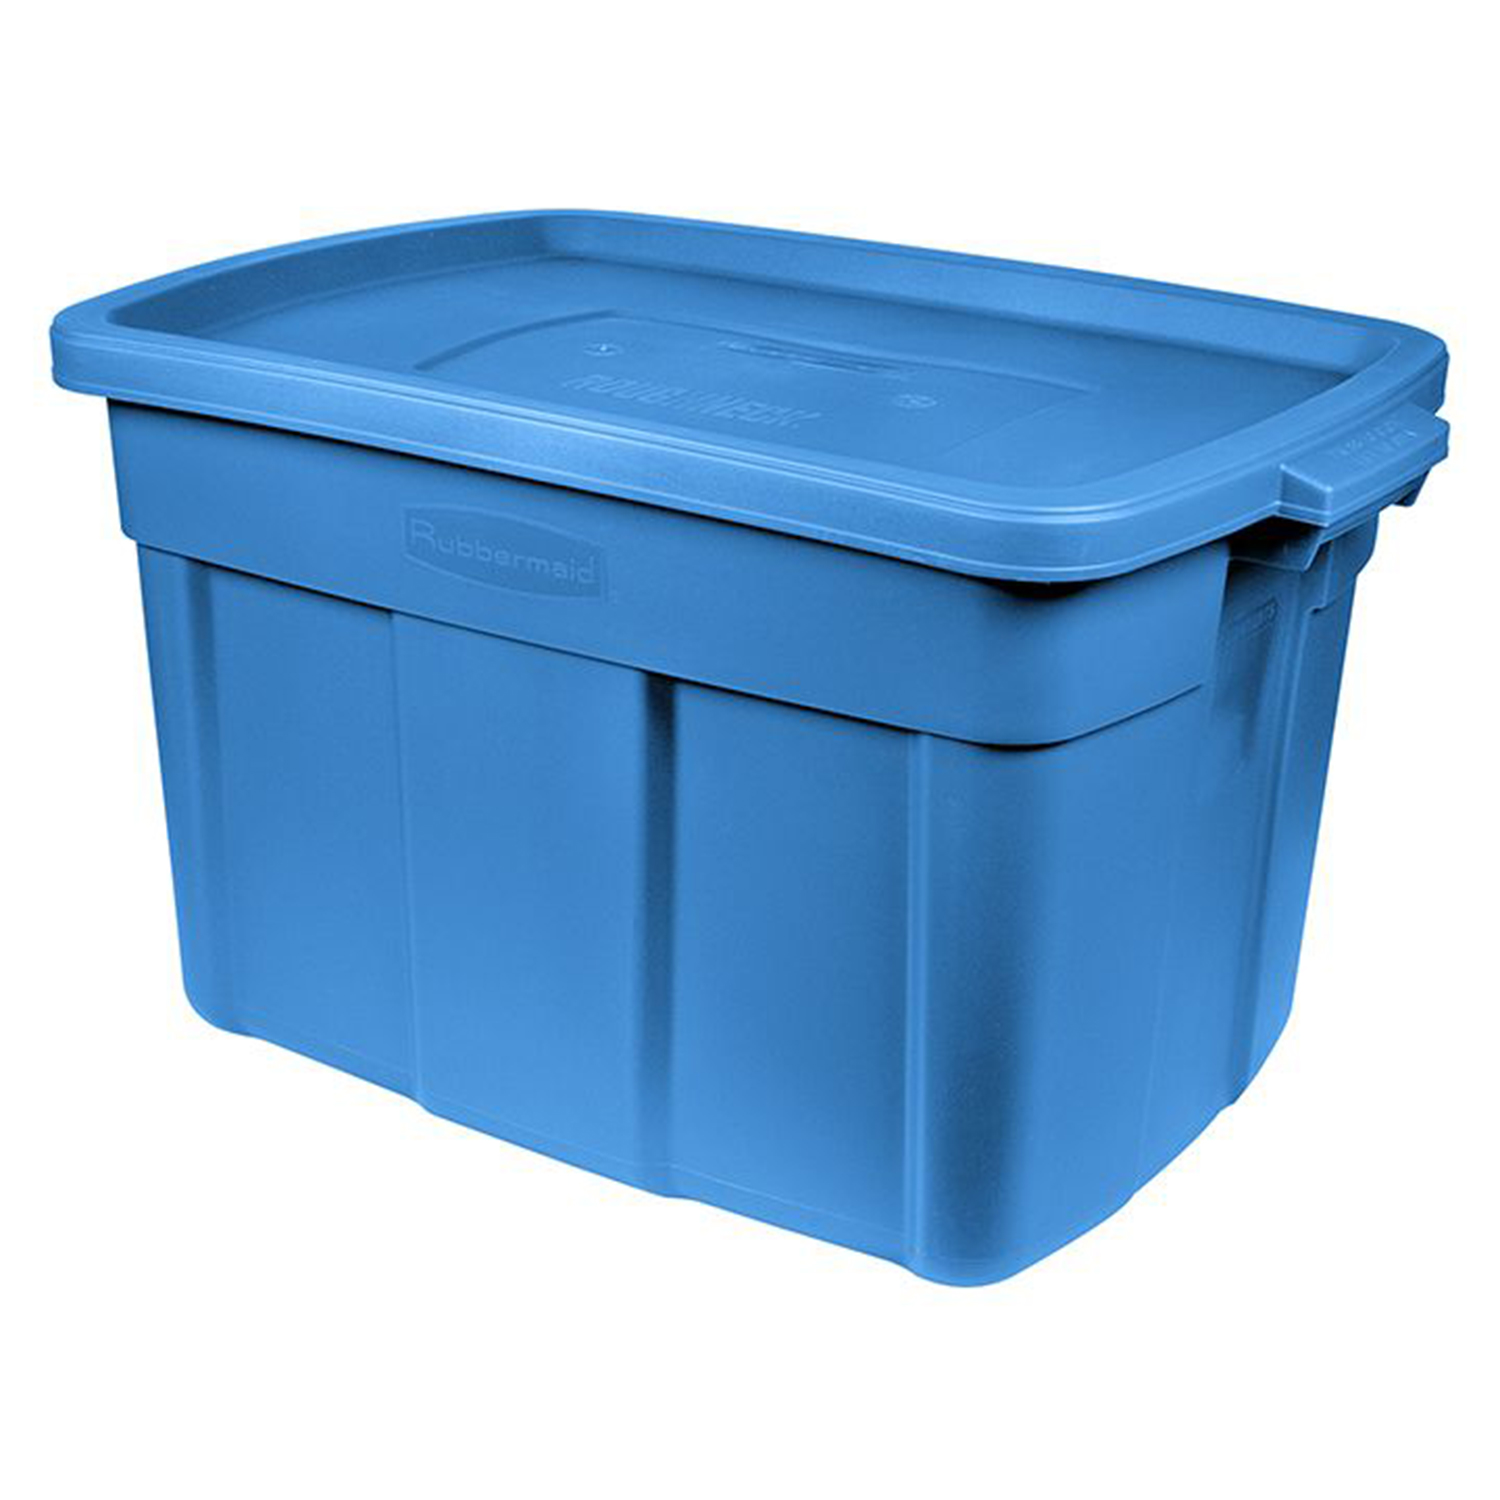 Rubbermaid Roughneck Tote 18 Gal Storage Container, Heritage Blue (6 Pack) - image 3 of 5